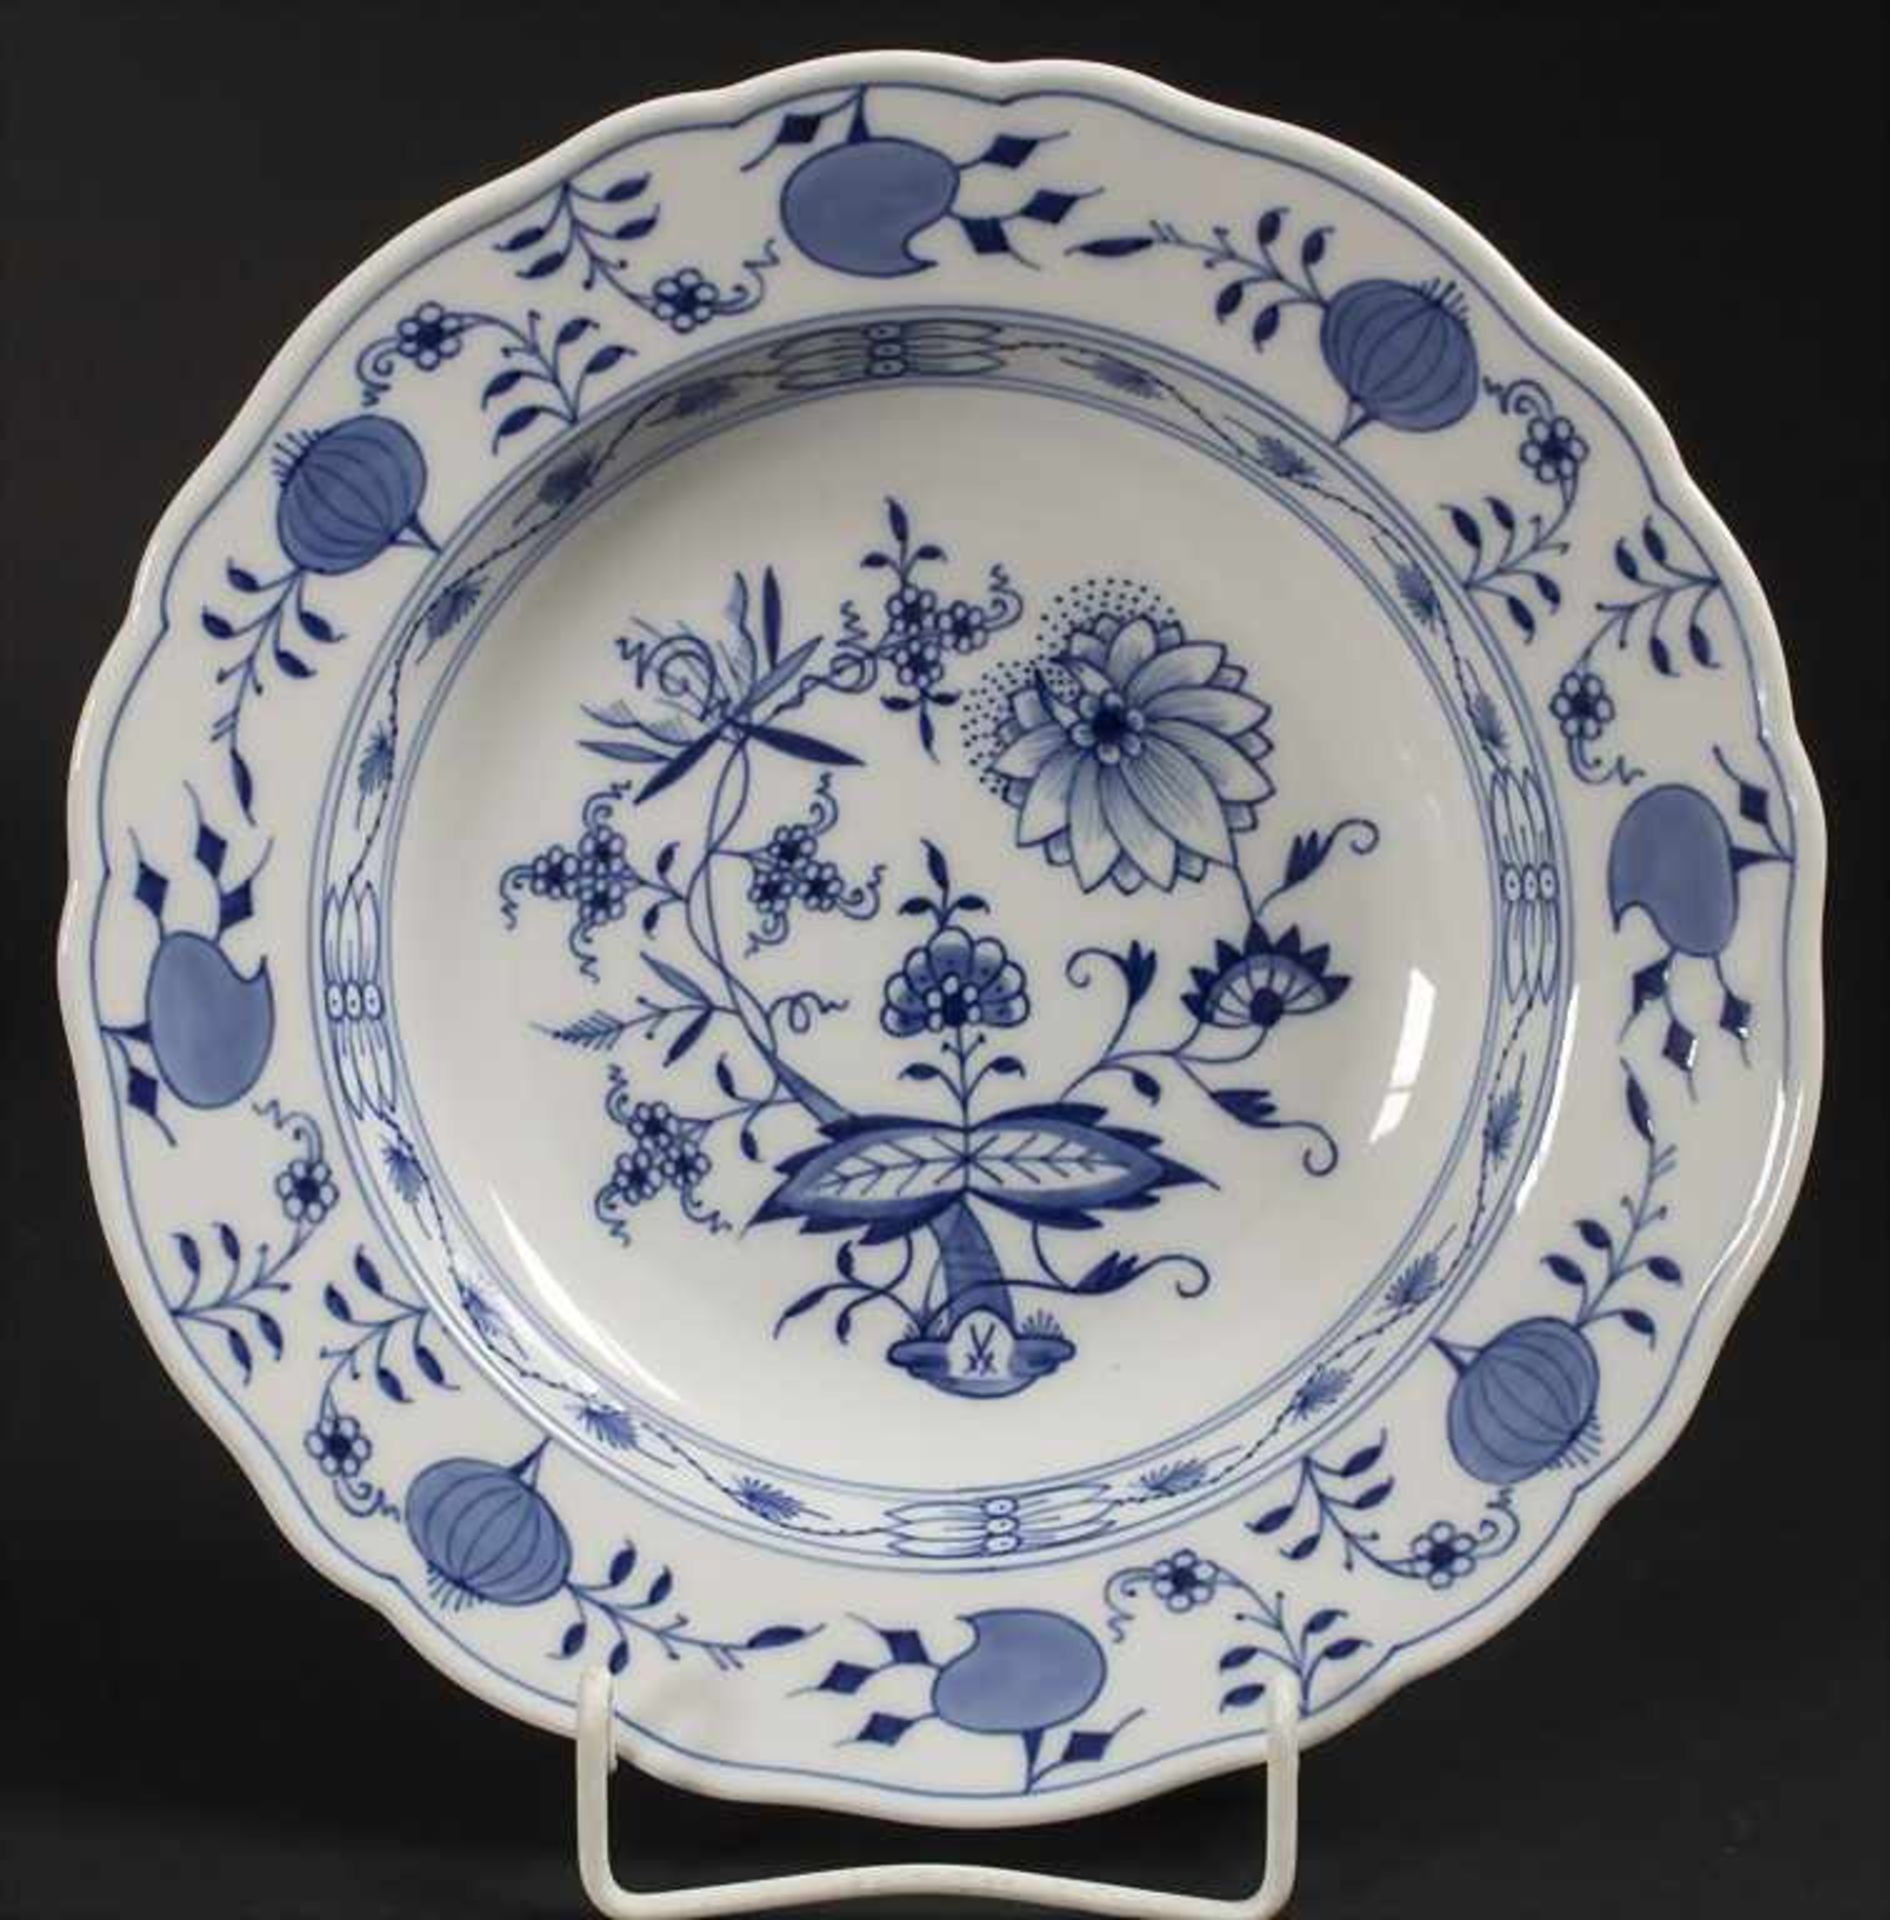 28 tlg. Service 'Zwiebelmuster' / A 28-piece dinner set with 'Onion Pattern', Meissen, 20. Jh. - Image 6 of 17